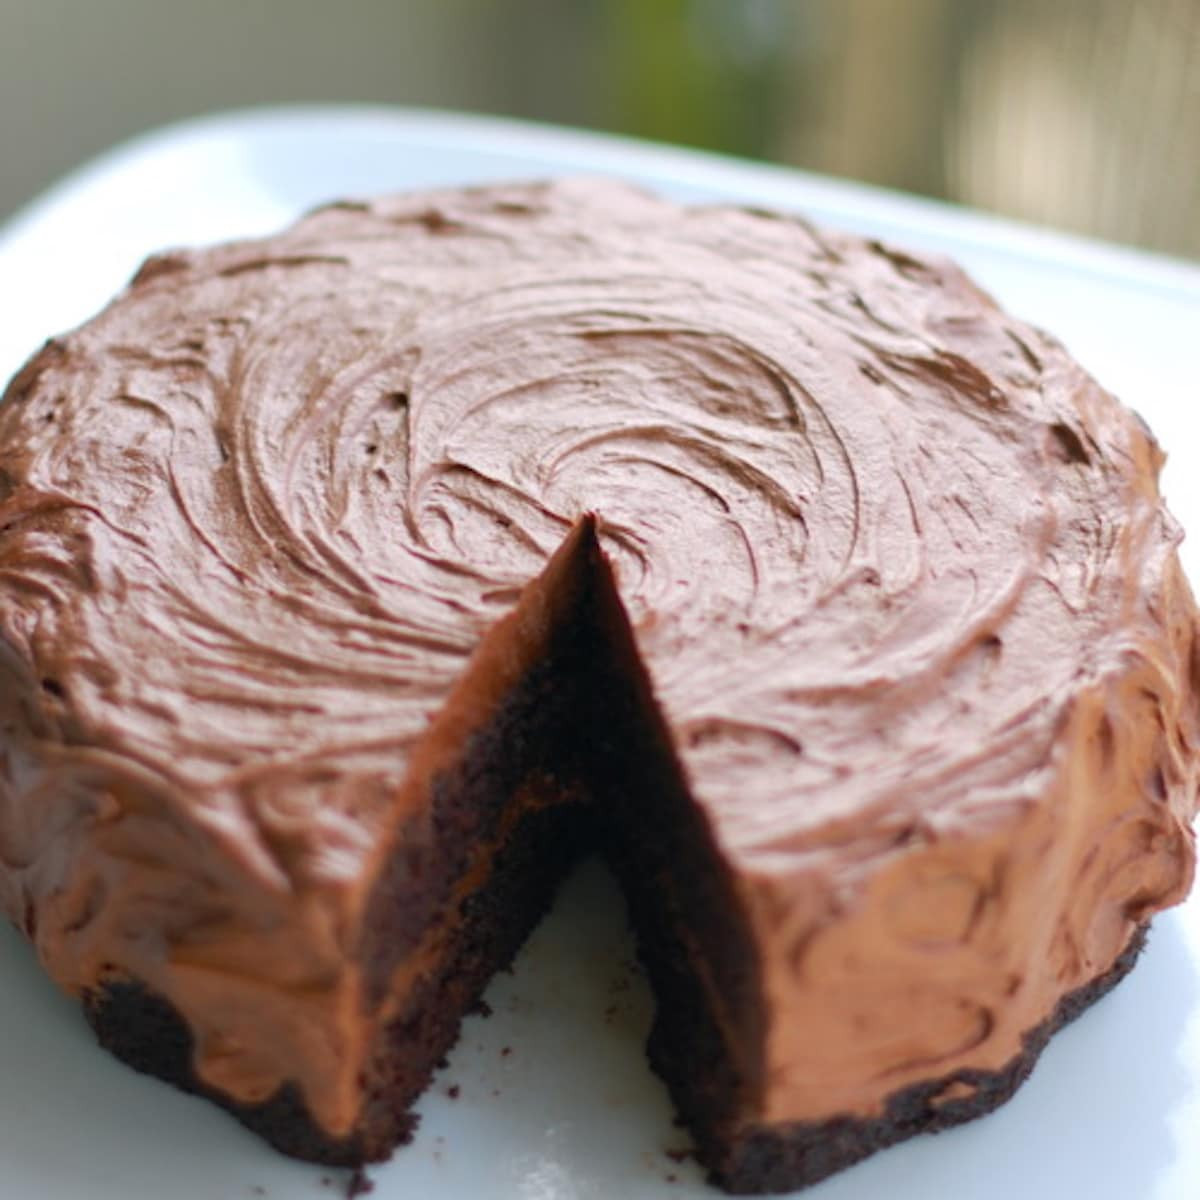 Chocolate Cake With Buttercream Frosting
 Double Chocolate Cake with Buttercream Frosting Recipe